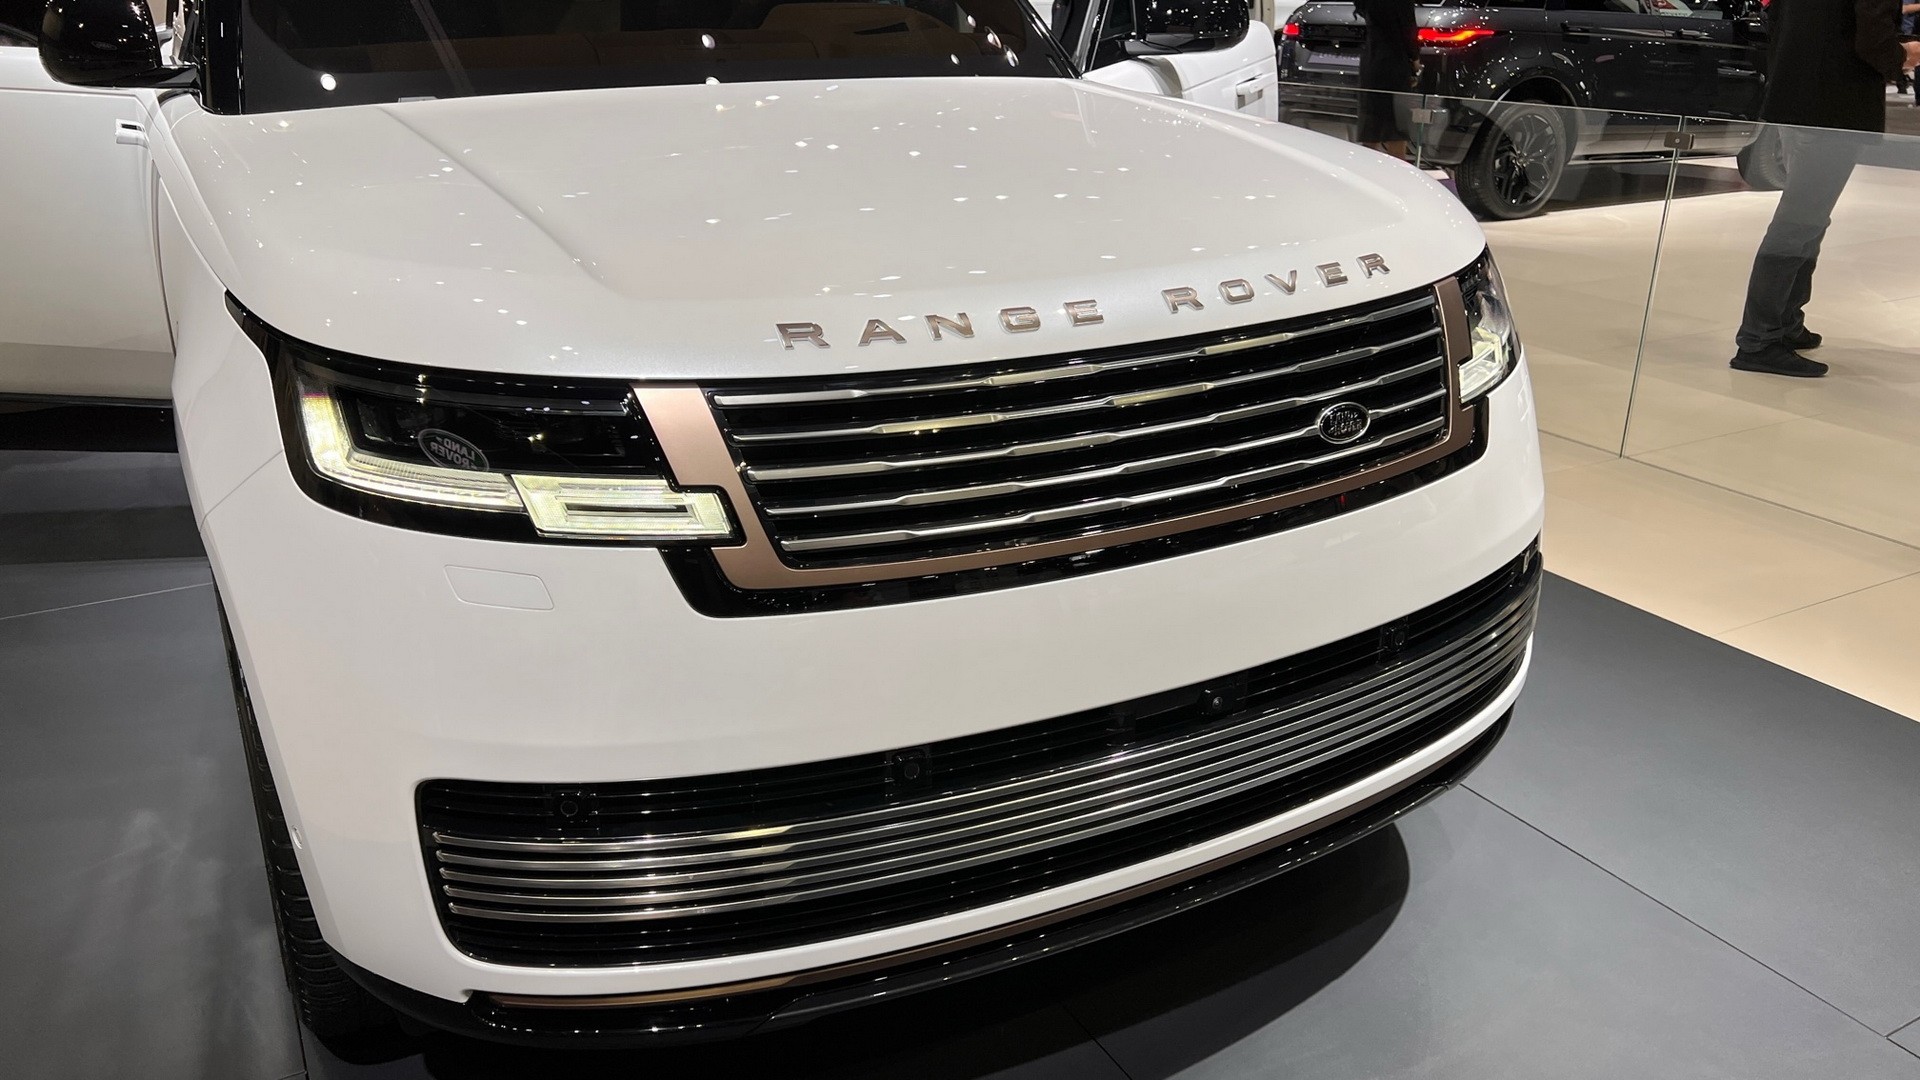 all-new-2022-range-rover-visits-la-auto-show-to-entice-its-target-audience-4.jpg